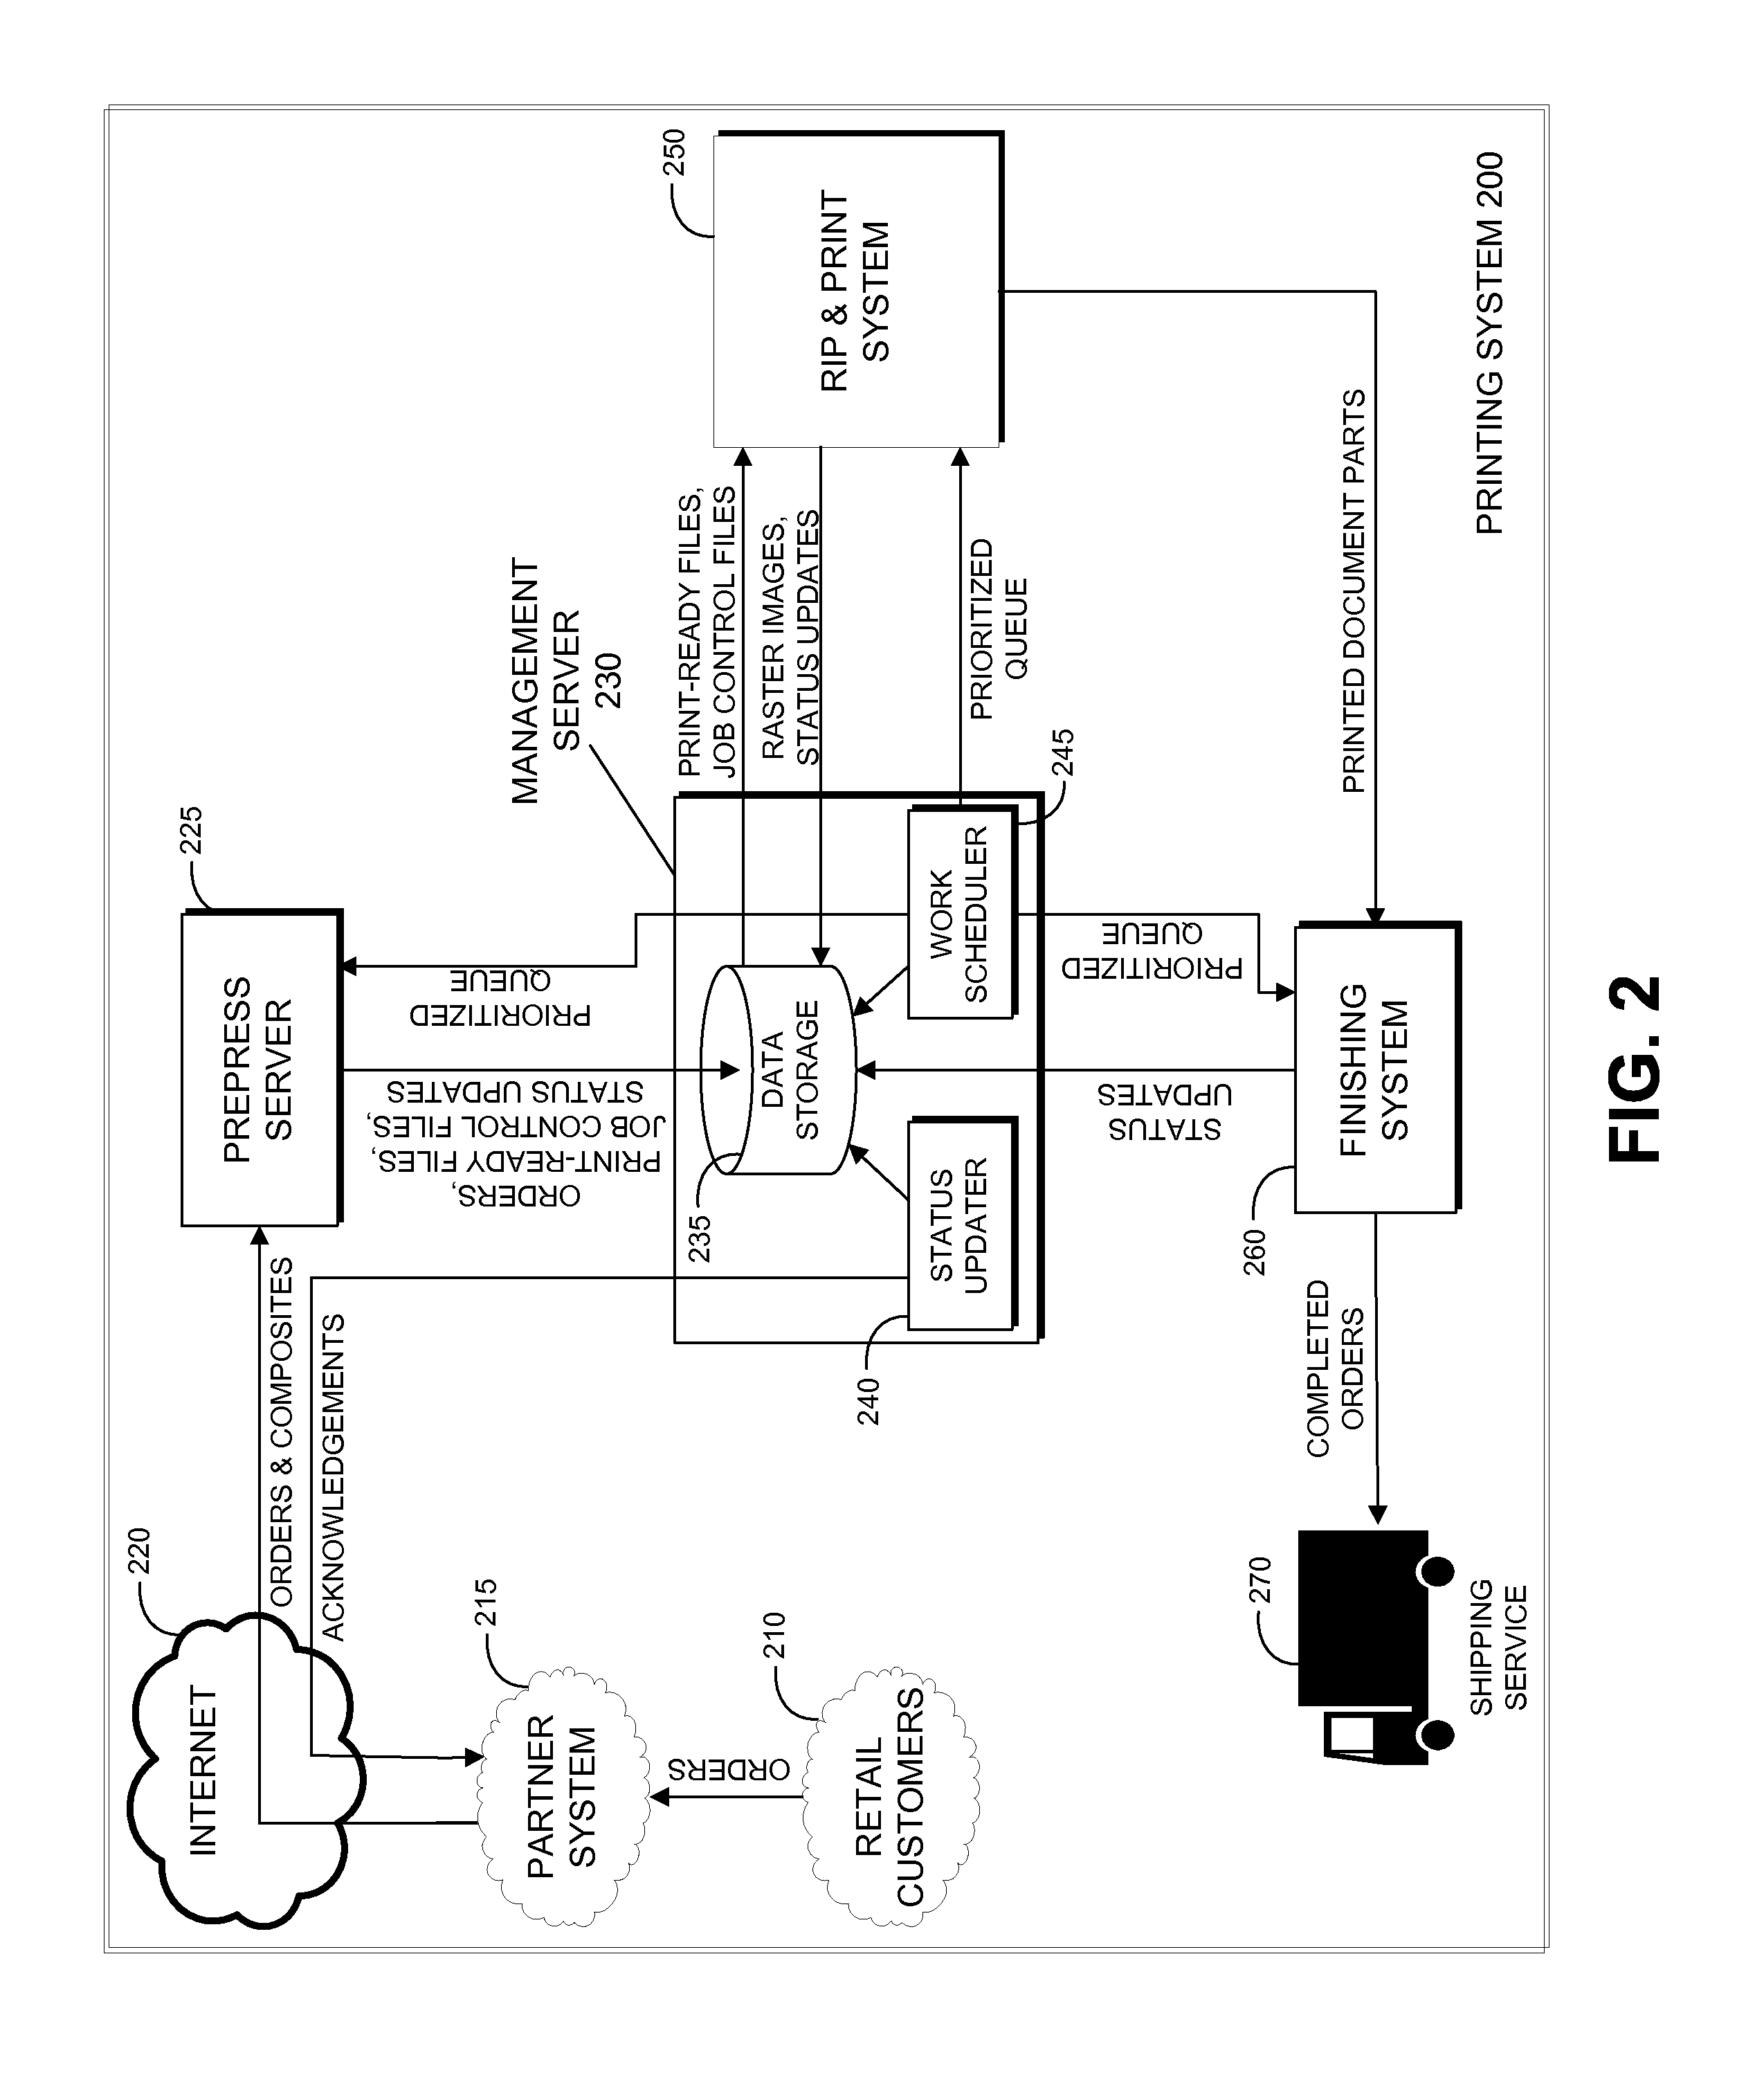 Multiproduct printing workflow system with dynamic cadence